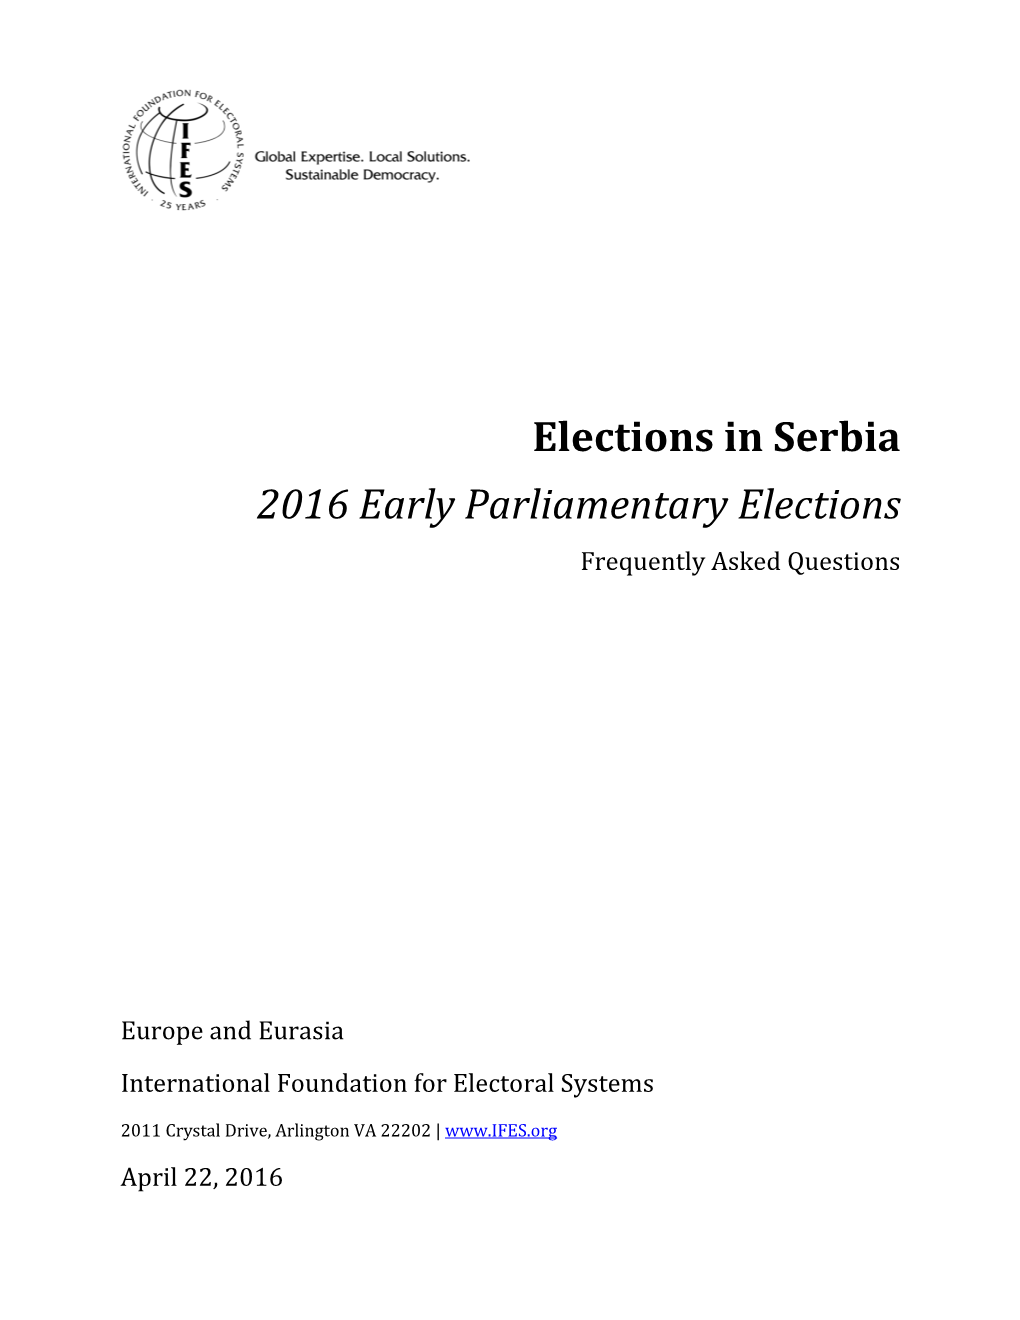 Elections in Serbia 2016 Early Parliamentary Elections Frequently Asked Questions